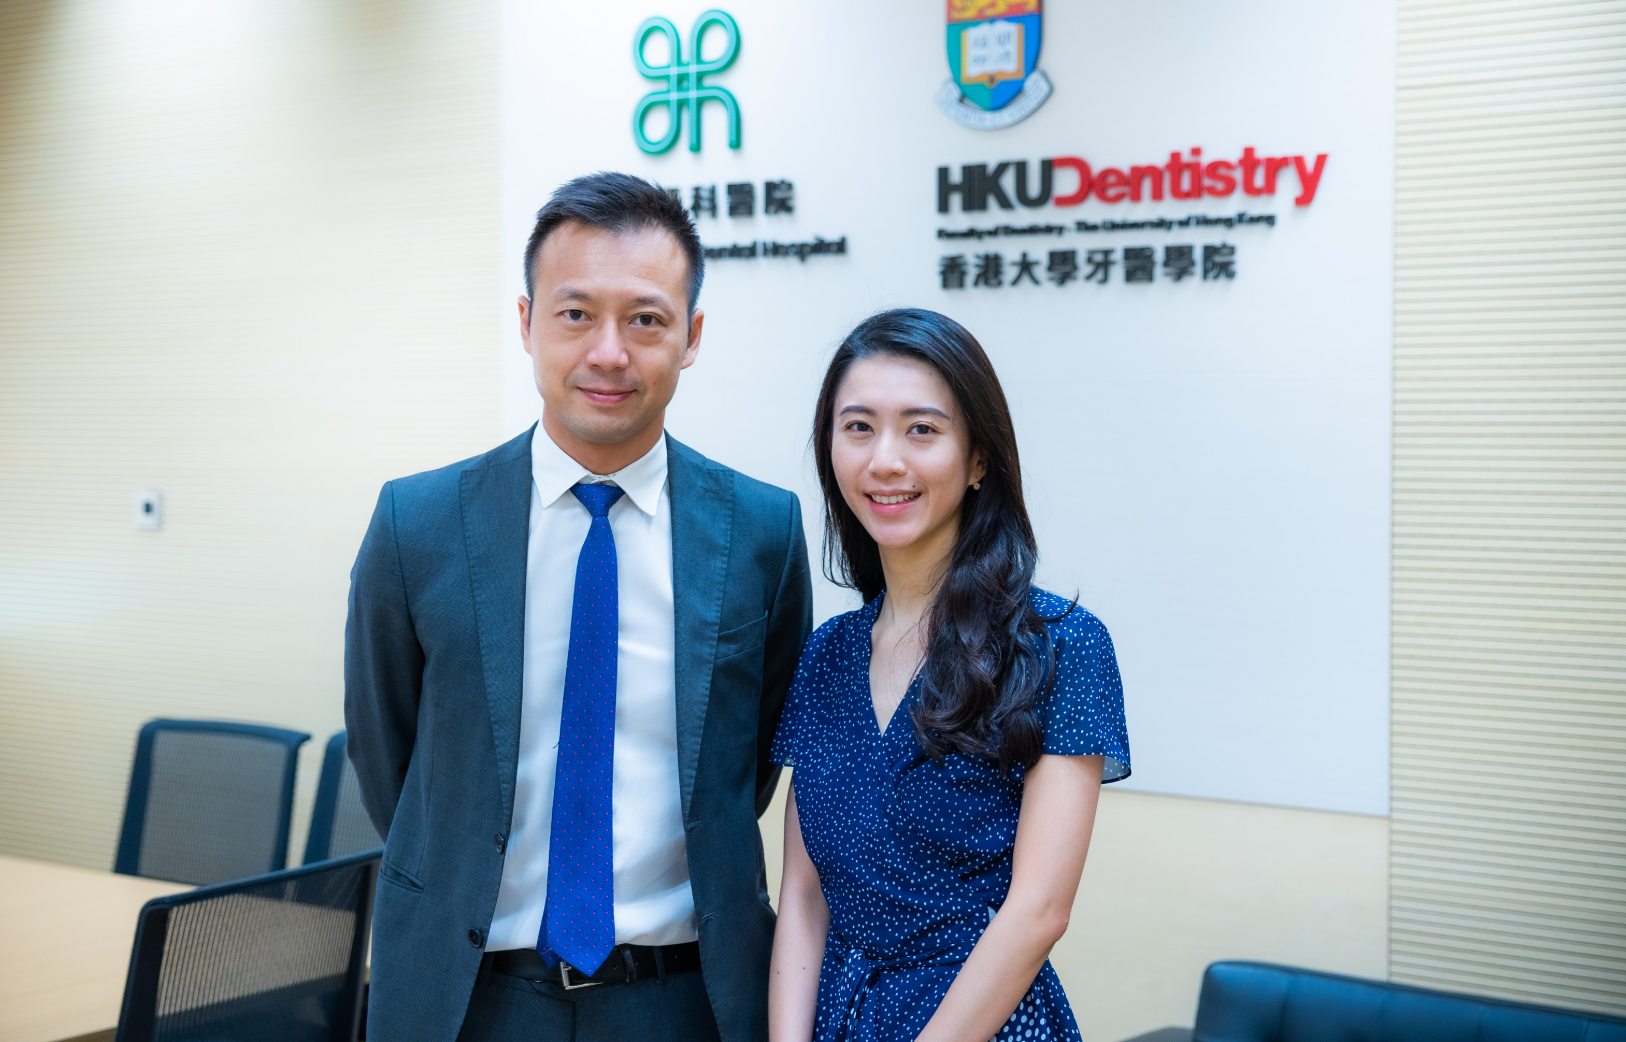 Dr Mike Leung and Dr Aileen Toh